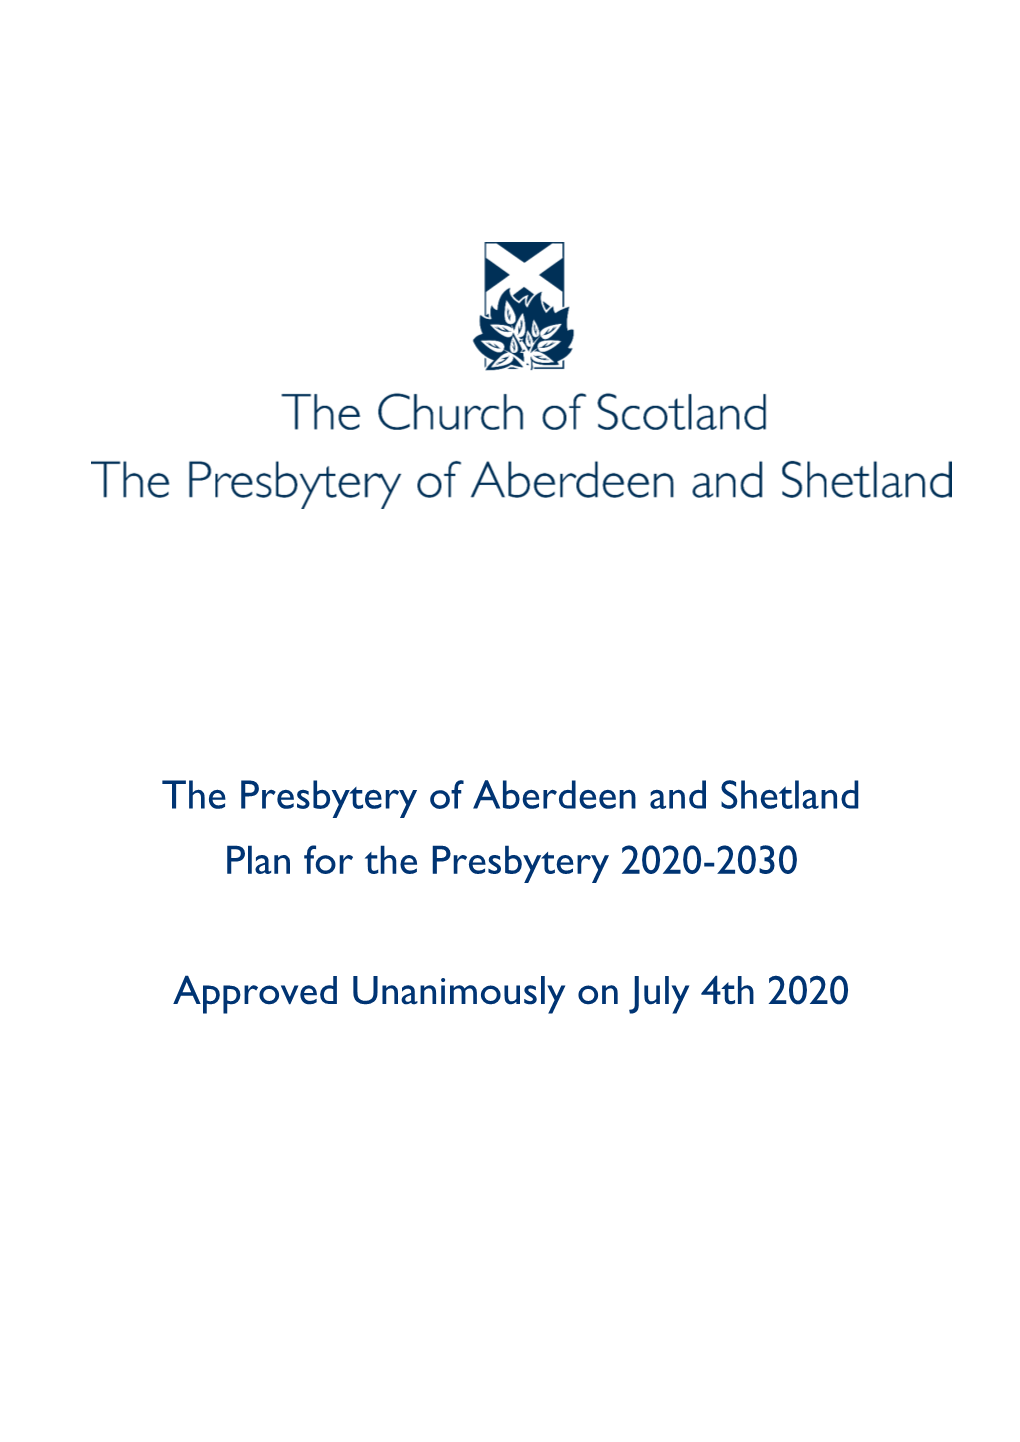 The Presbytery of Aberdeen and Shetland Plan for the Presbytery 2020-2030